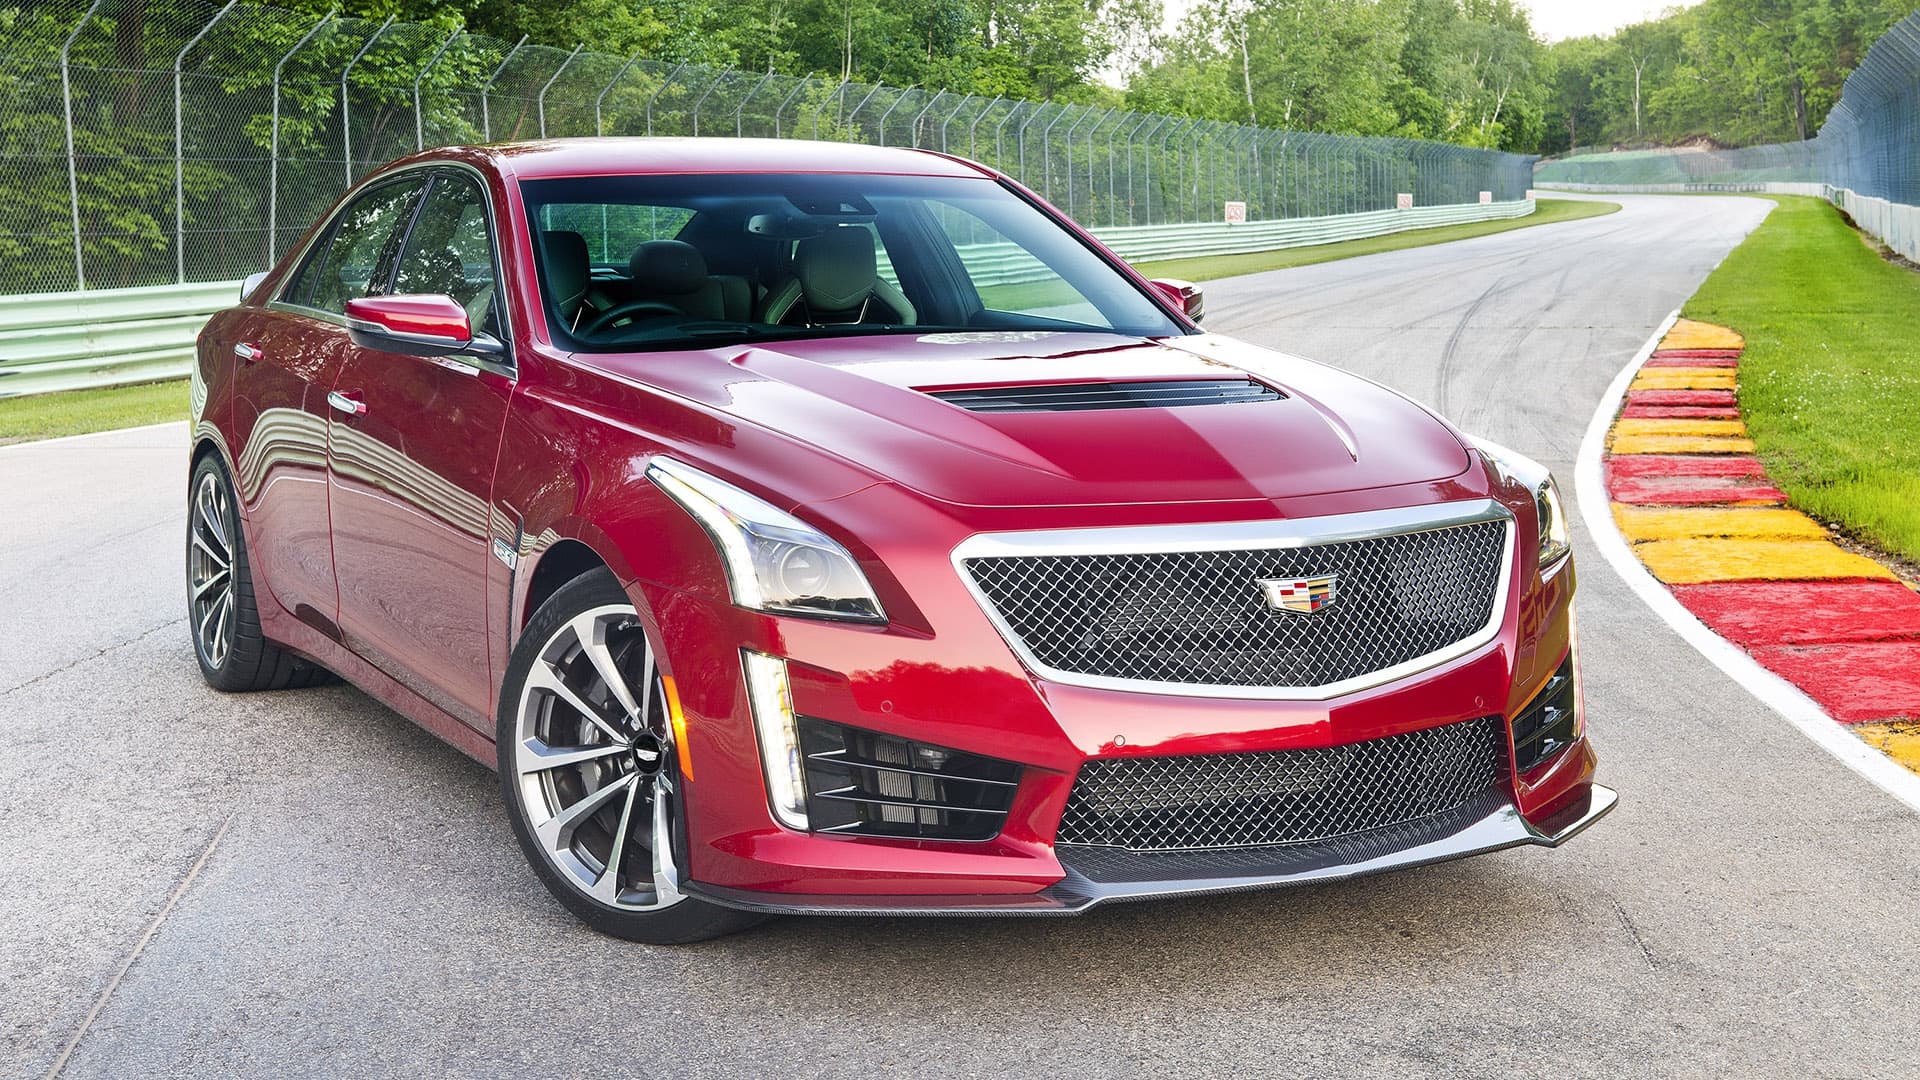  Cadillac CTS V wallpapers HD High Quality Resolution